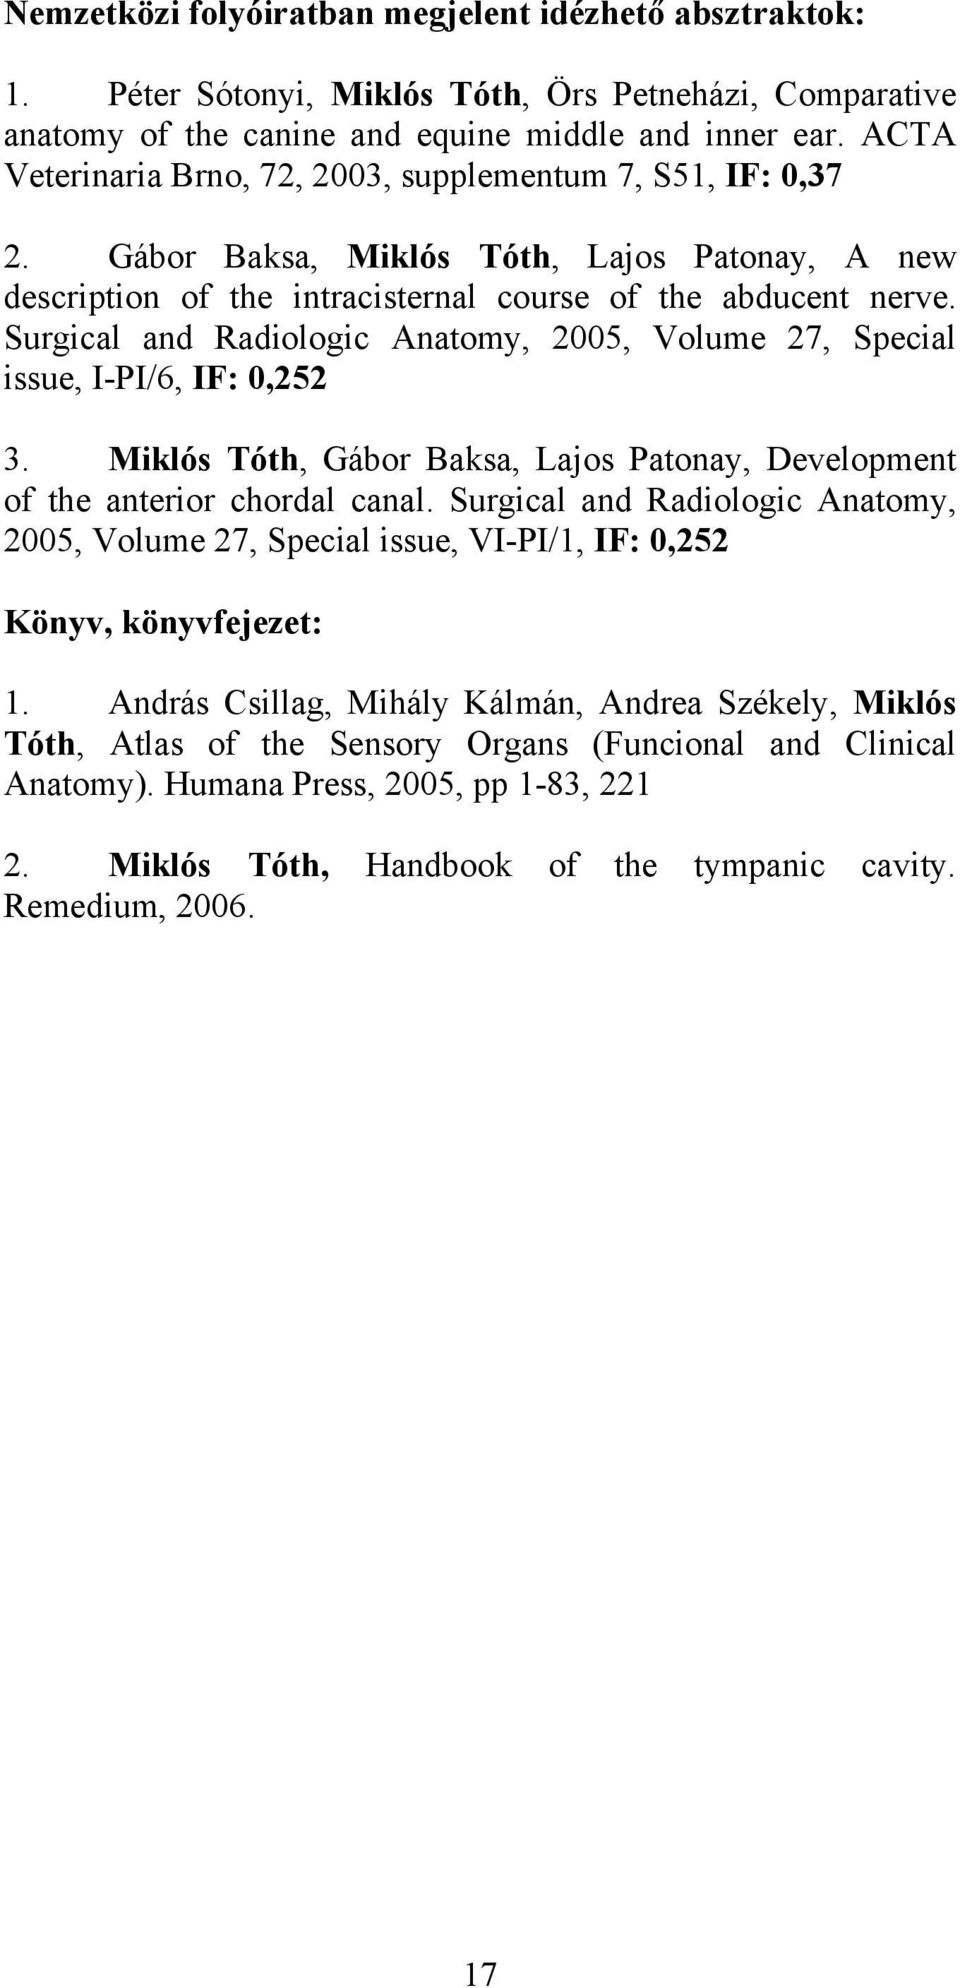 Surgical and Radiologic Anatomy, 2005, Volume 27, Special issue, I-PI/6, IF: 0,252 3. Miklós Tóth, Gábor Baksa, Lajos Patonay, Development of the anterior chordal canal.